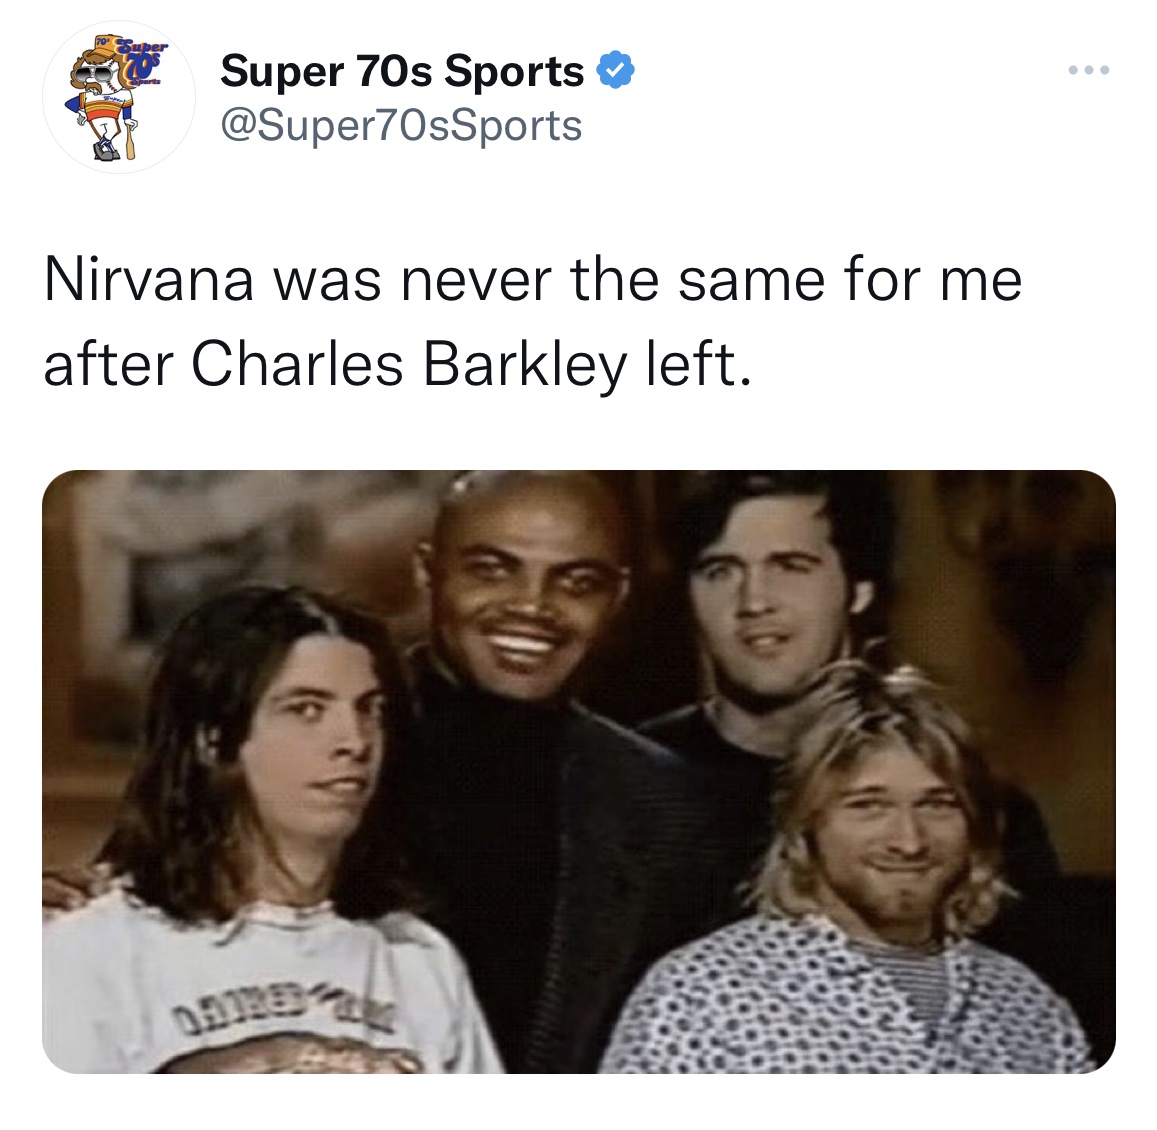 Celeb roasts of the week - kurt cobain charles barkley - Super 70s Sports Nirvana was never the same for me after Charles Barkley left.